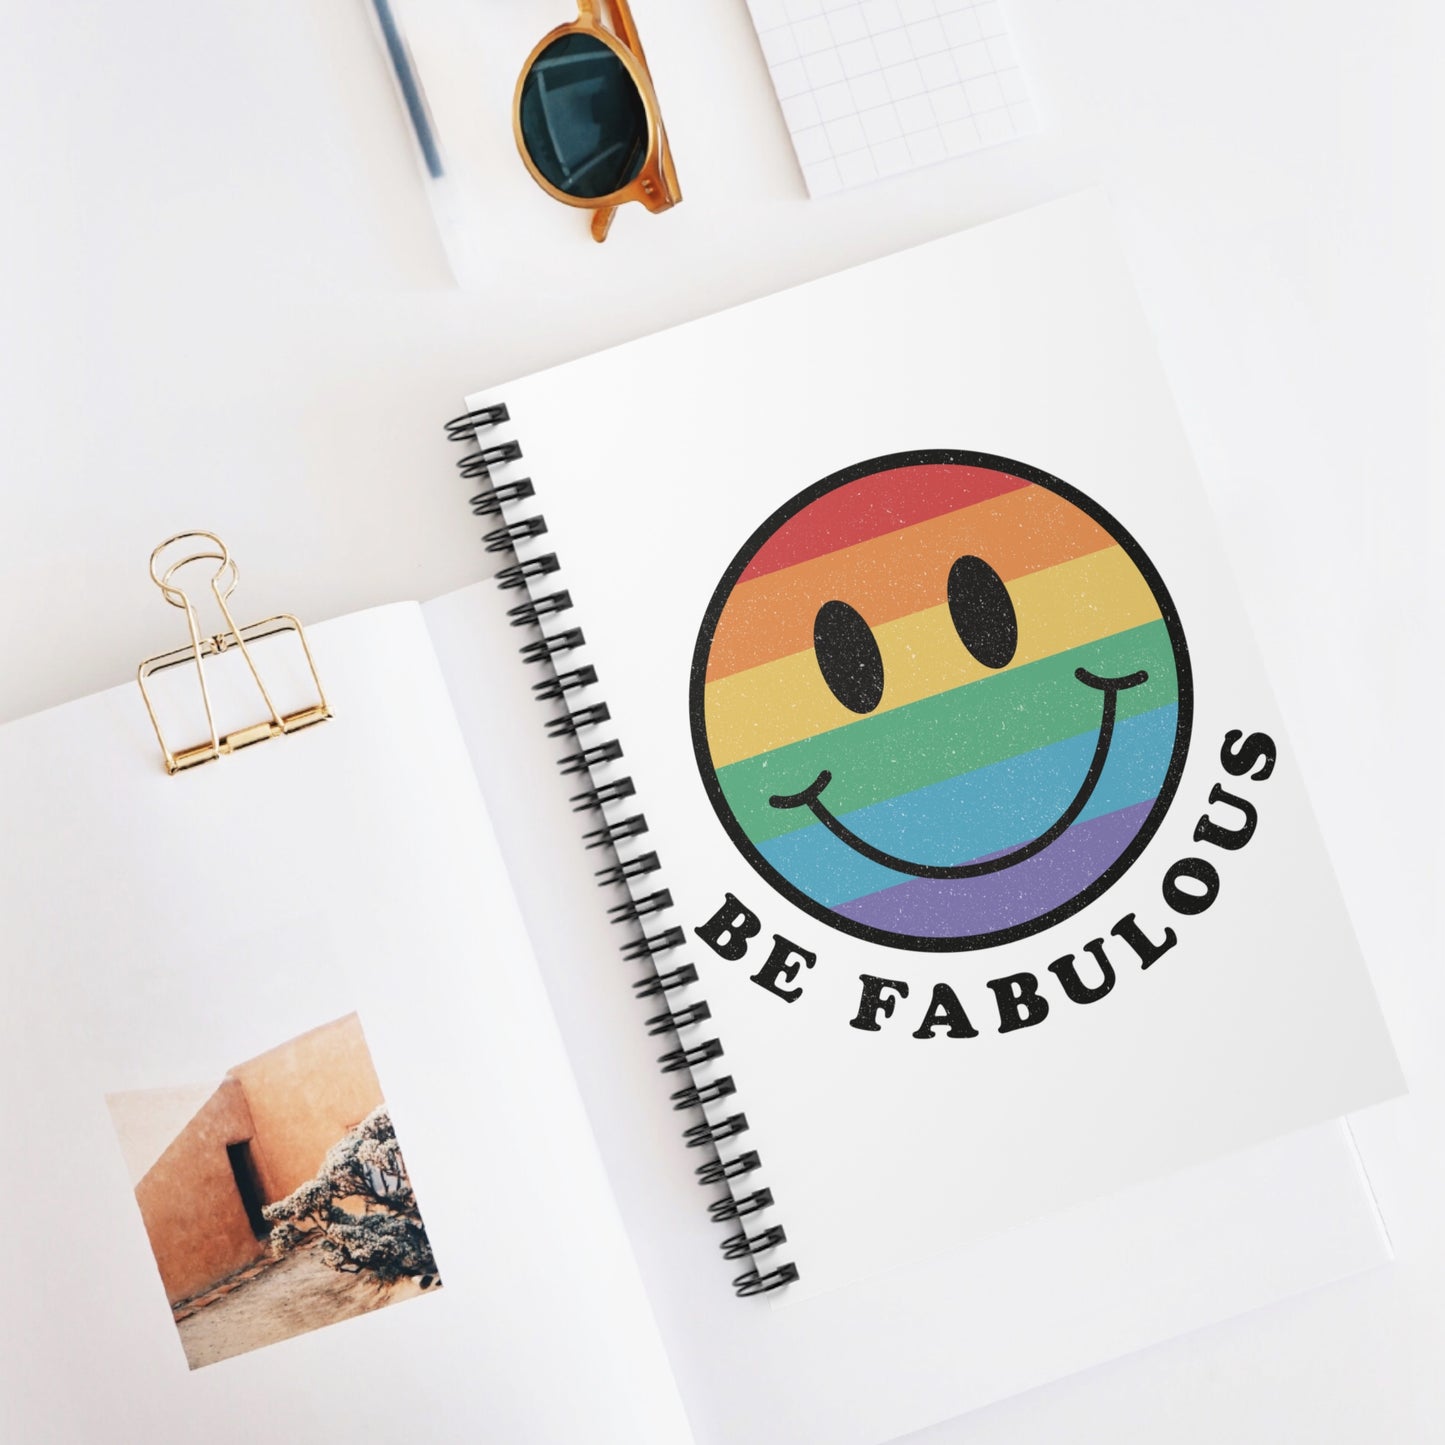 Be Fabulous: Spiral Notebook - Log Books - Journals - Diaries - and More Custom Printed by TheGlassyLass